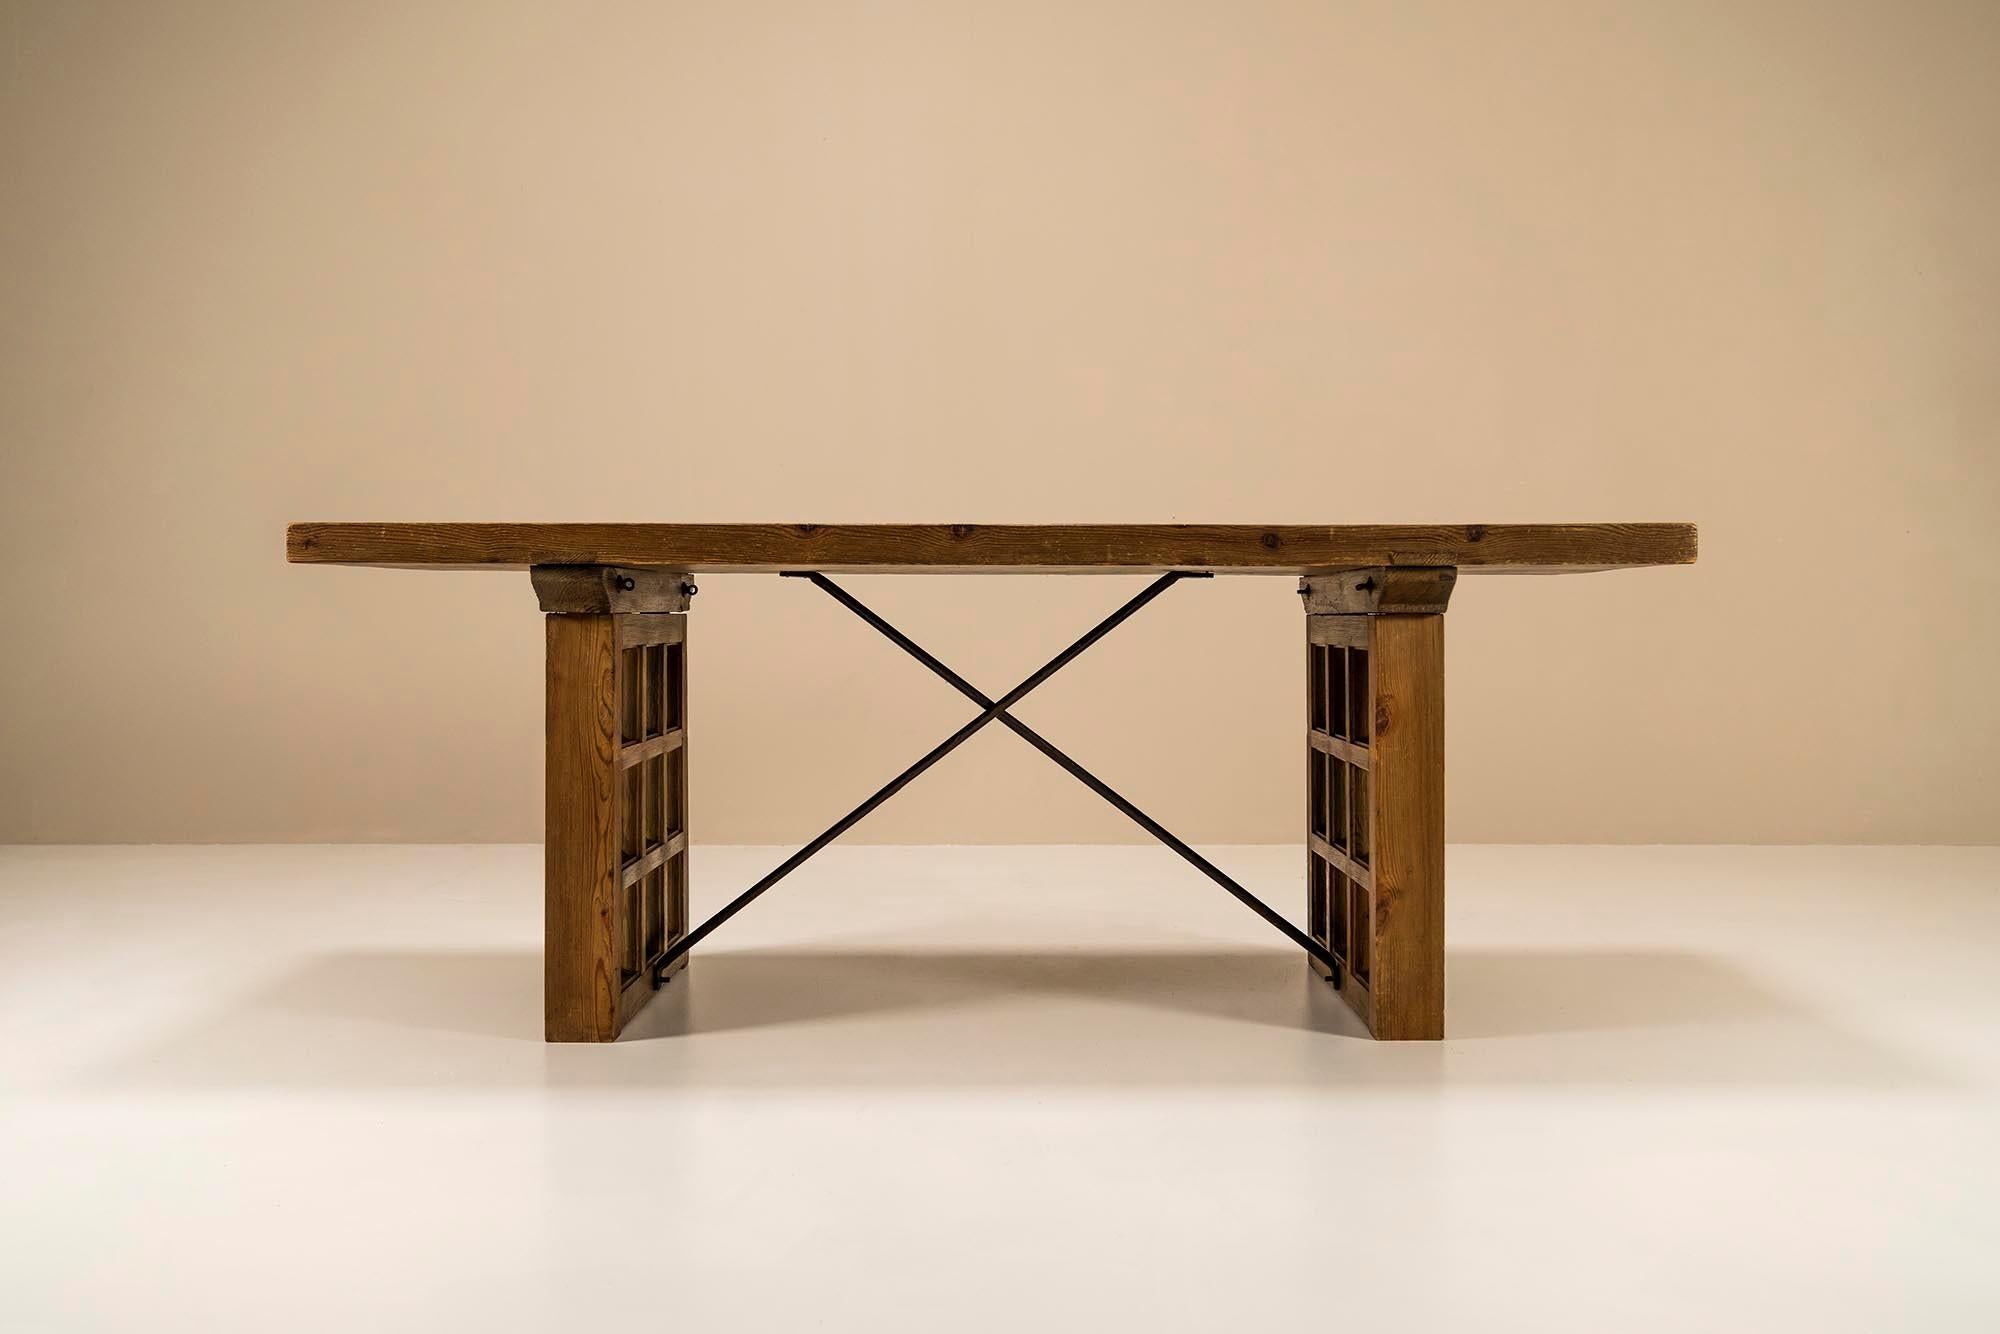 Biosca dining table with geometric patterns in pine.The Biosca furniture, as we have already indicated, is shrouded in a haze of mystery. Where exactly does it come from, who made it and above all who is the inventor of these striking but very